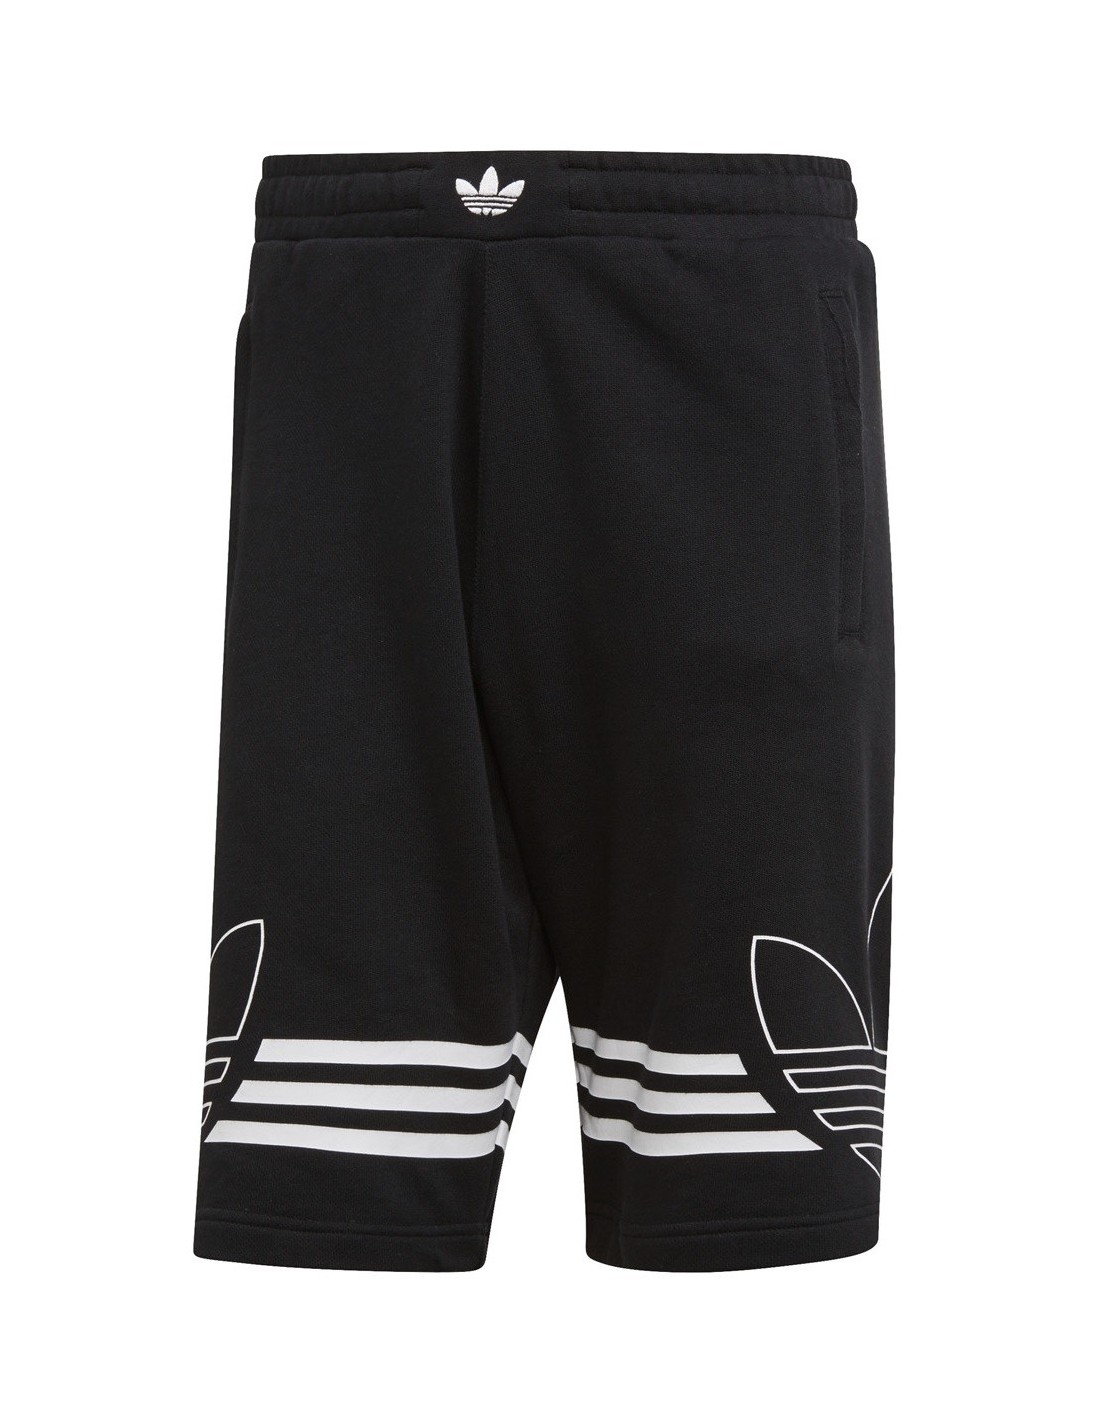 adidas shorts outline